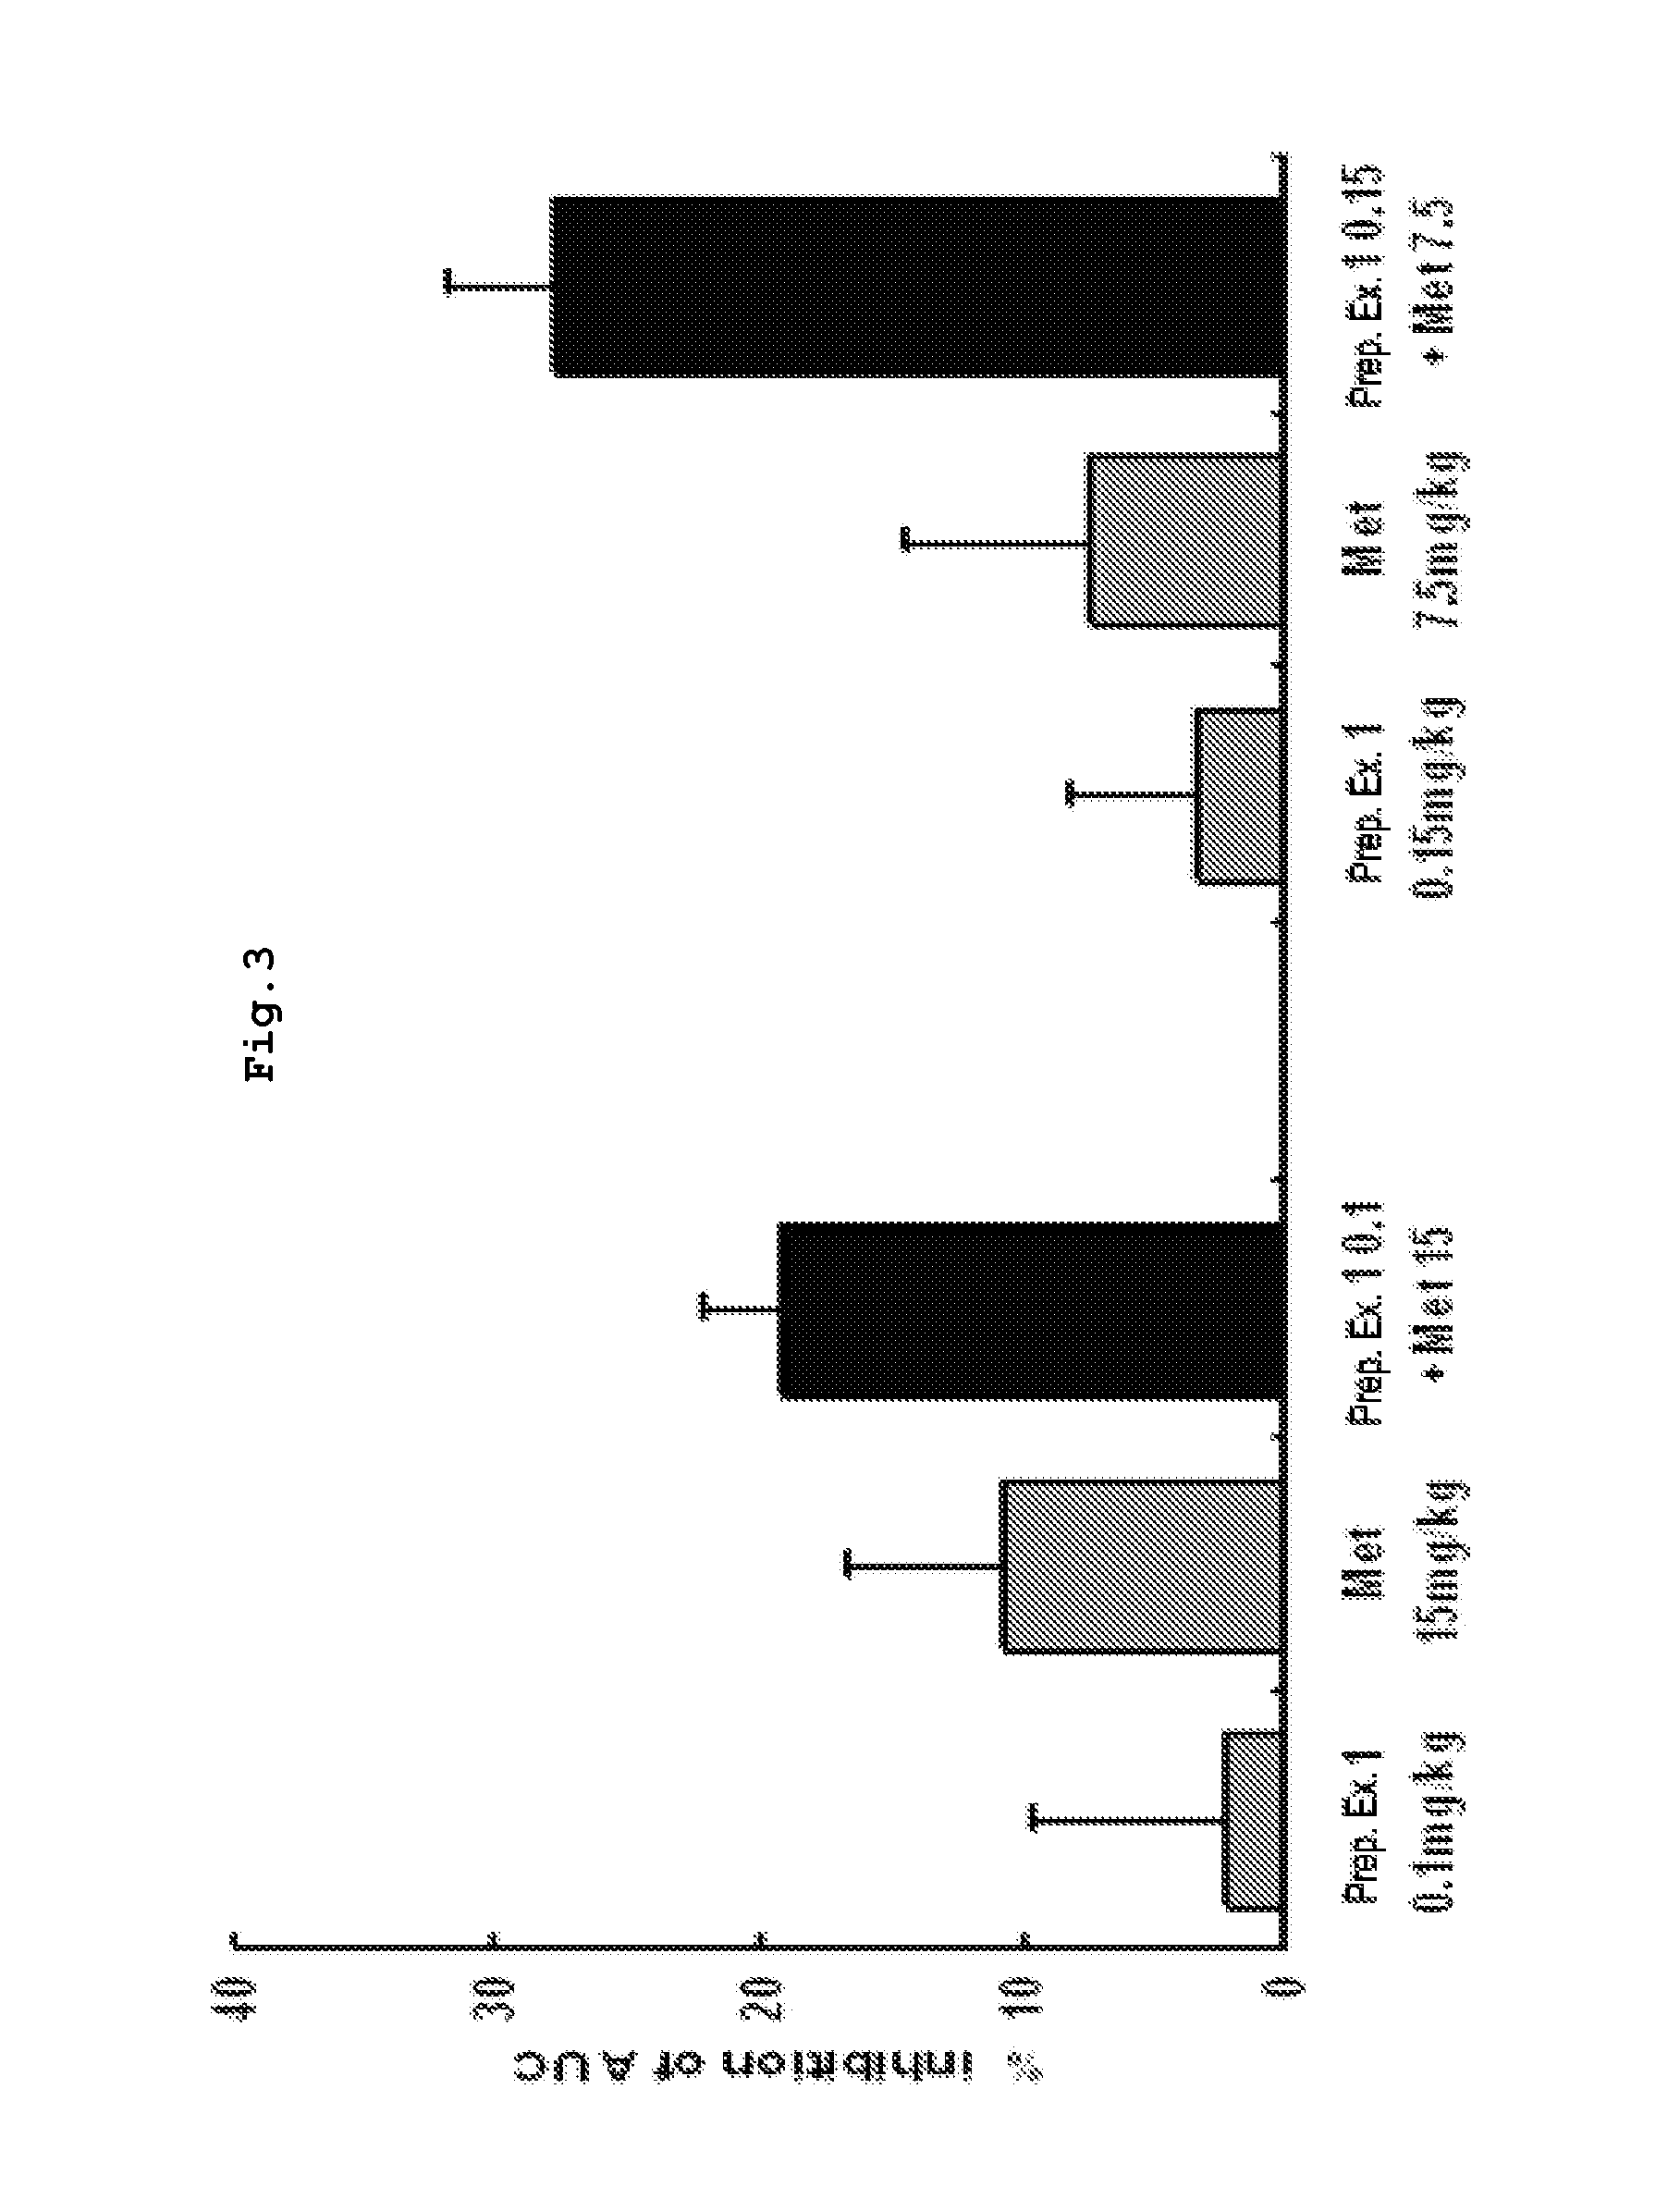 Pharmaceutical Composition for Prevention and Treatment of Diabetes or Obesity Comprising a Compound that Inhibits Activity of Dipeptidyl Peptidase-IV, and other Antidiabetic or Antiobesity Agents as Active Ingredients